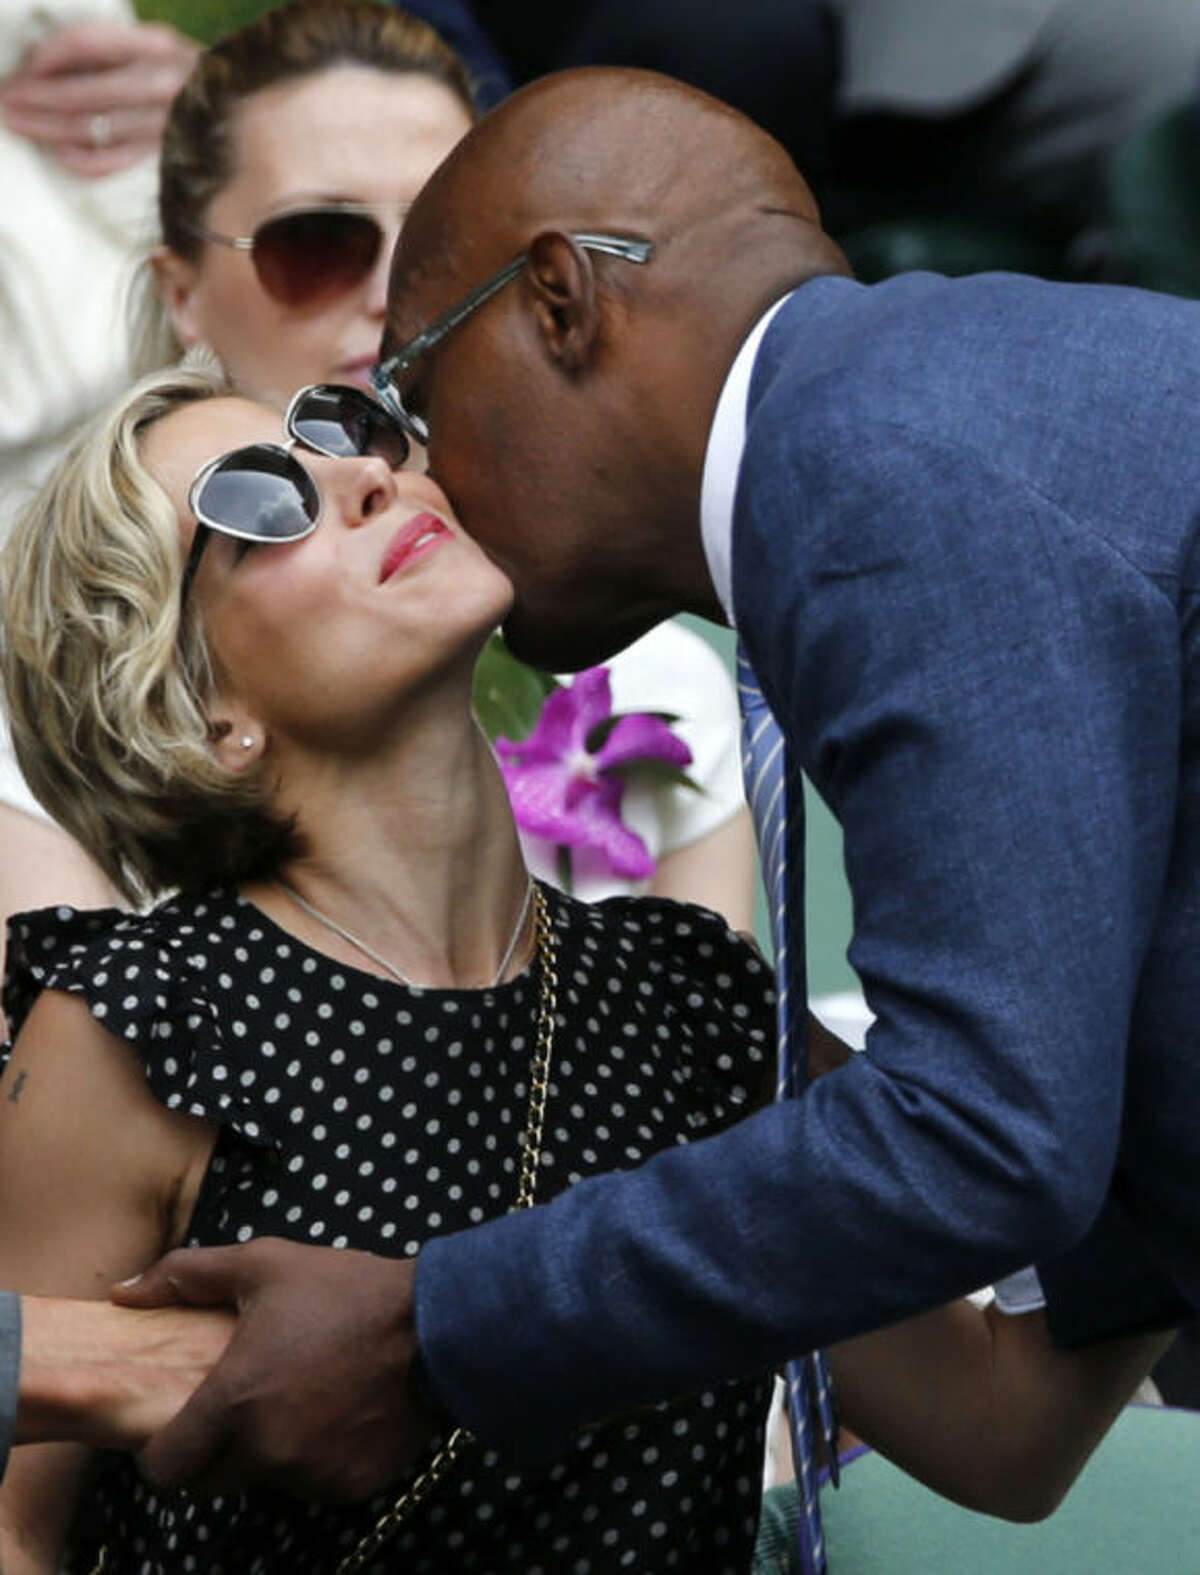 U.S actor Samuel L. Jackson, right, kisses Elsa Pataky as he arrives in the Royal Box prior to the men's singles final between Roger Federer of Switzerland and Novak Djokovic of Serbia on centre court at the All England Lawn Tennis Championships in Wimbledon, London, Sunday July 6, 2014. (AP Photo/Ben Curtis)